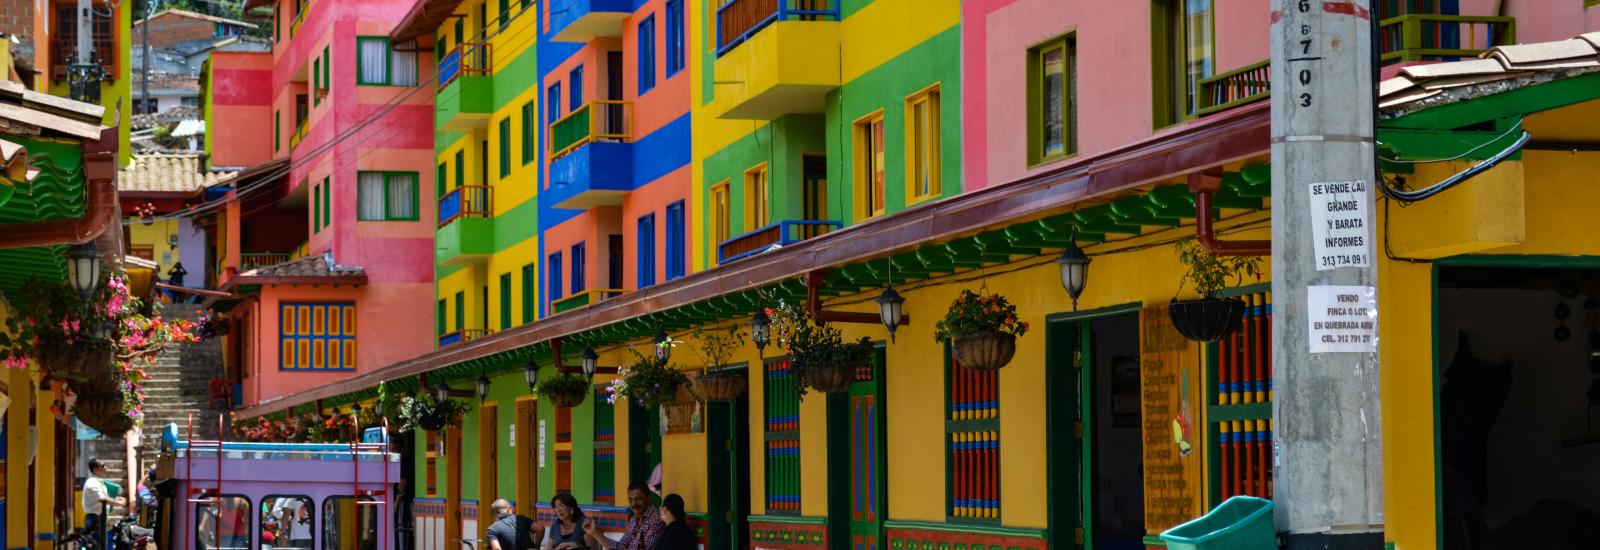 colorful street in Colombia